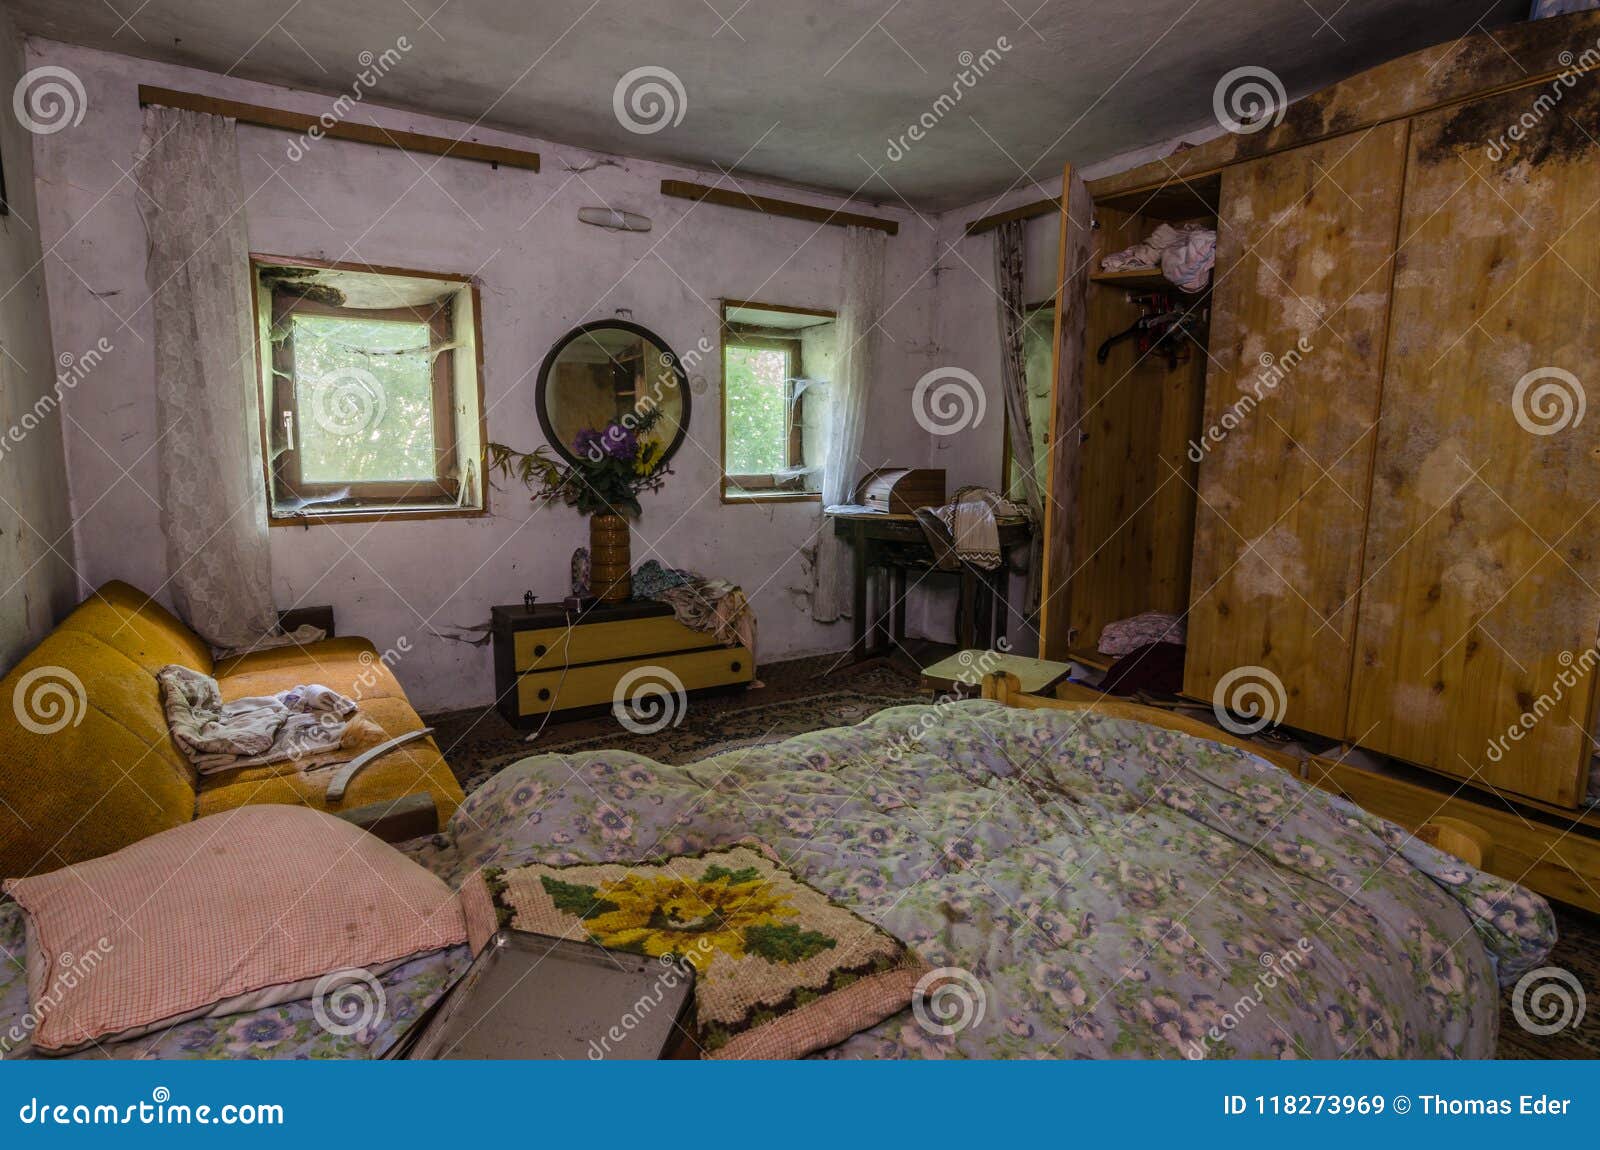 Abandoned Bedroom With Mold Stock Image Image Of